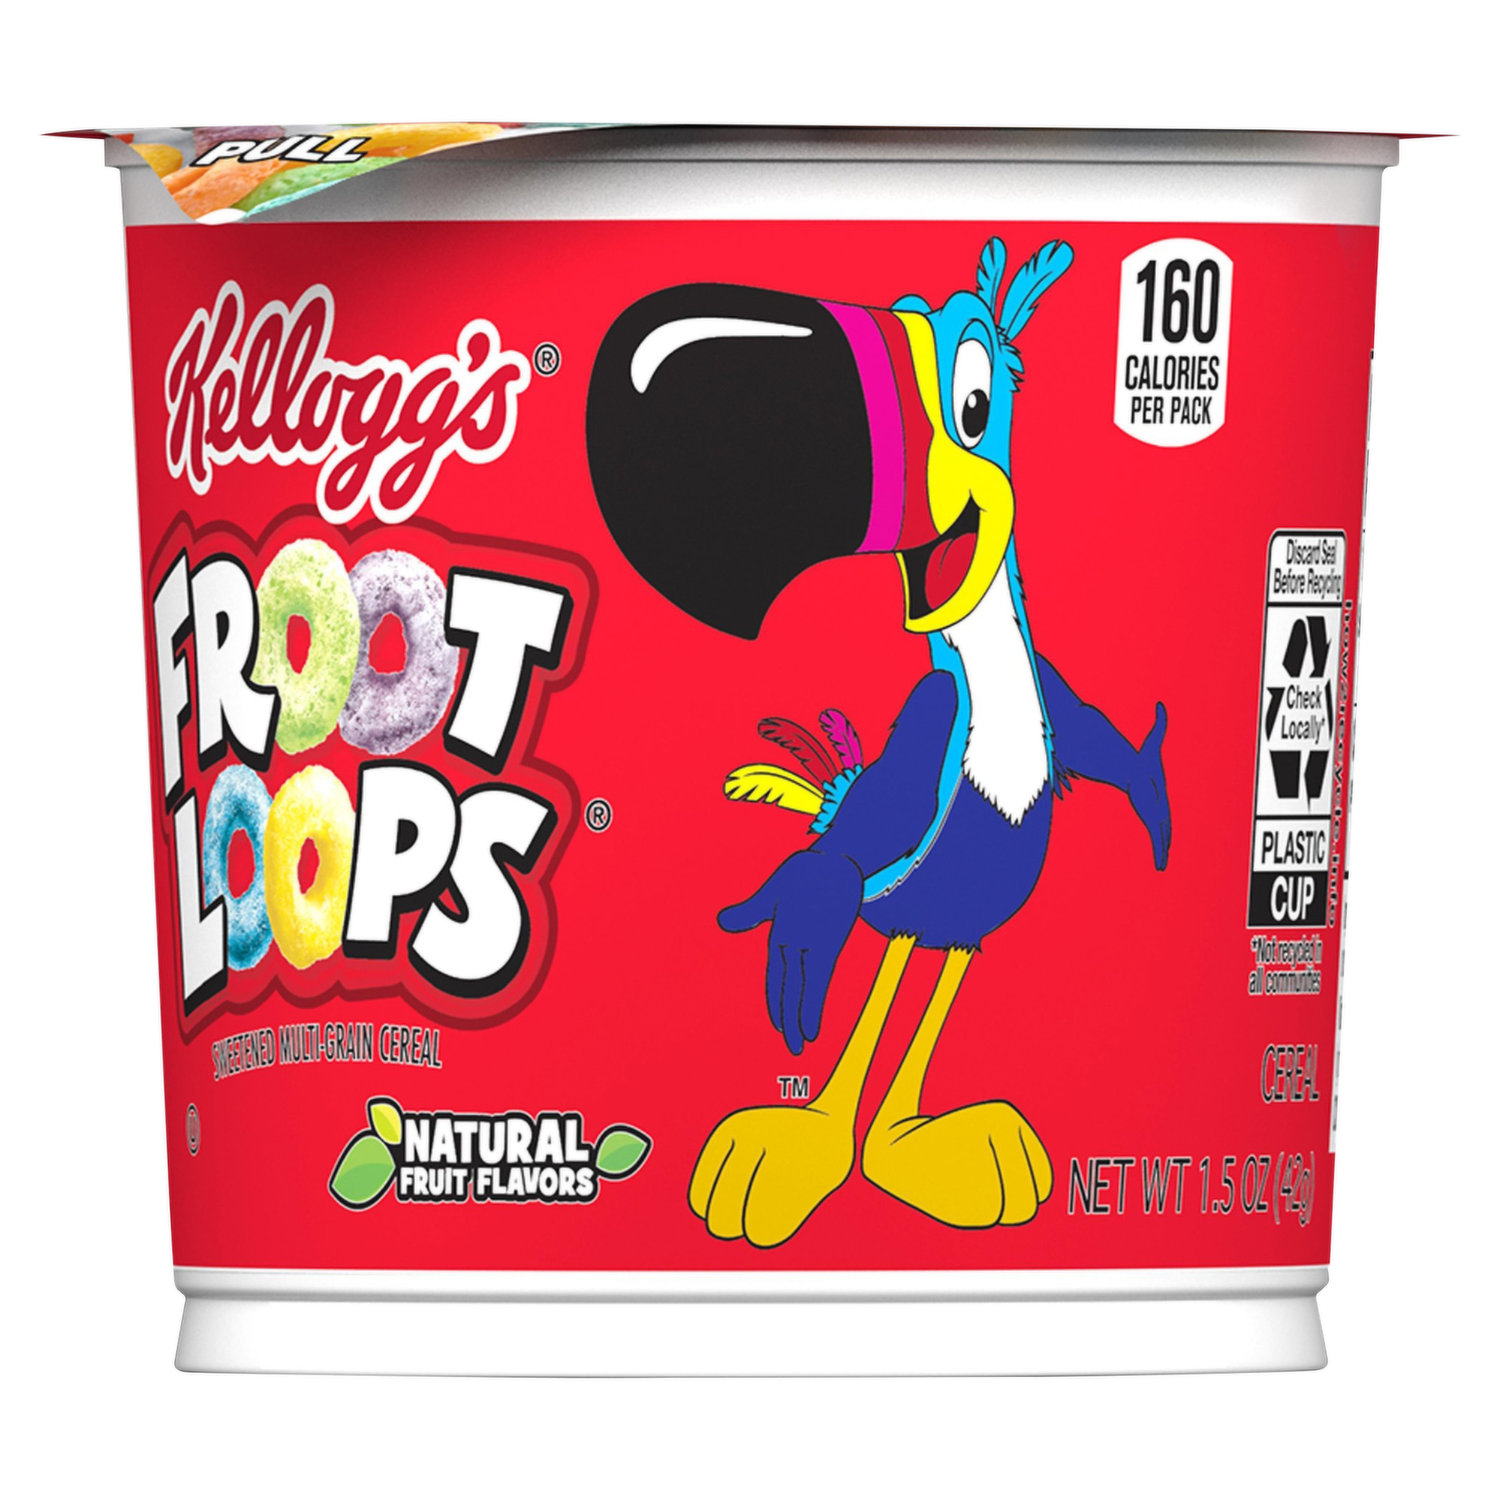 Kellogg's® Froot Loops Cereal Cups, 4 ct / 1.5 oz - Pay Less Super